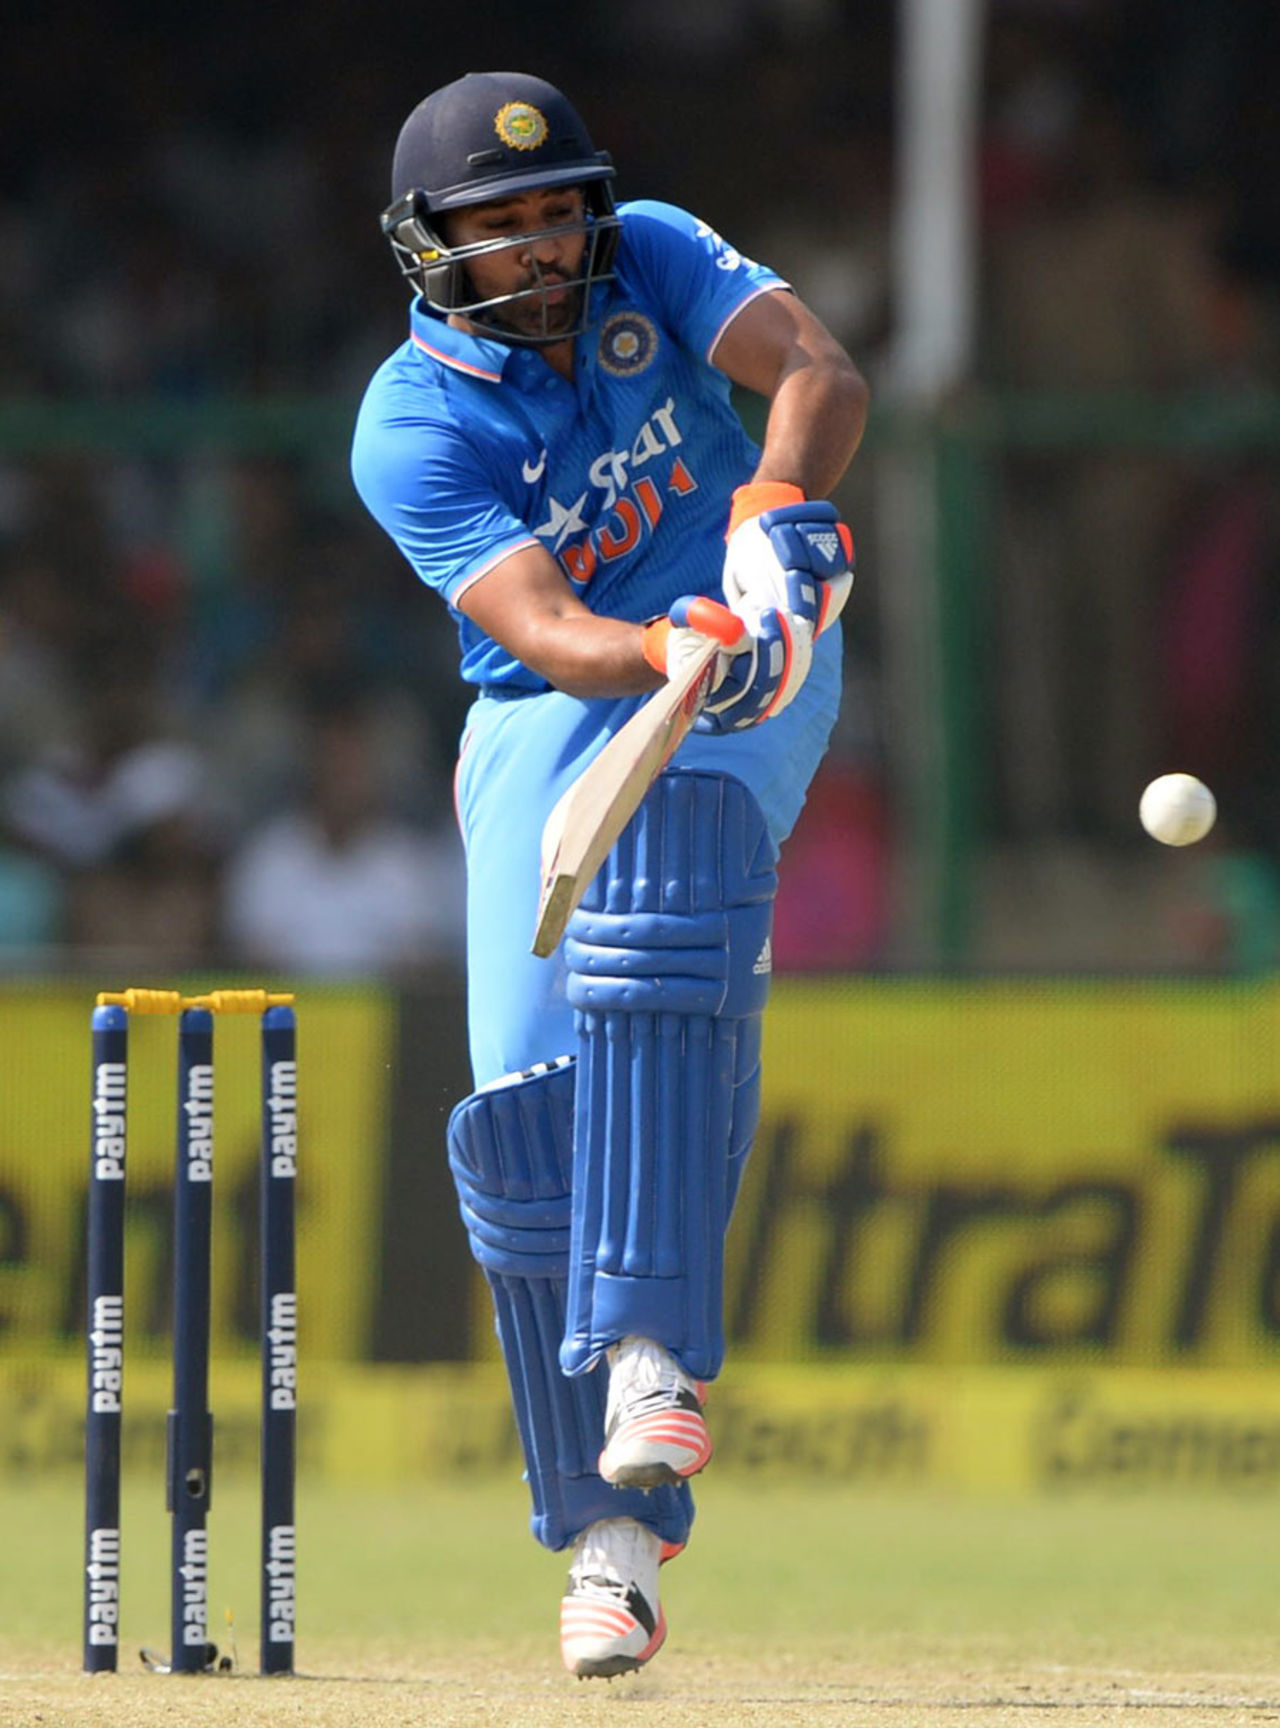 Eyes on the ball: Rohit Sharma plays a flick on the leg side, India v South Africa, 1st ODI, Kanpur, October 11, 2015